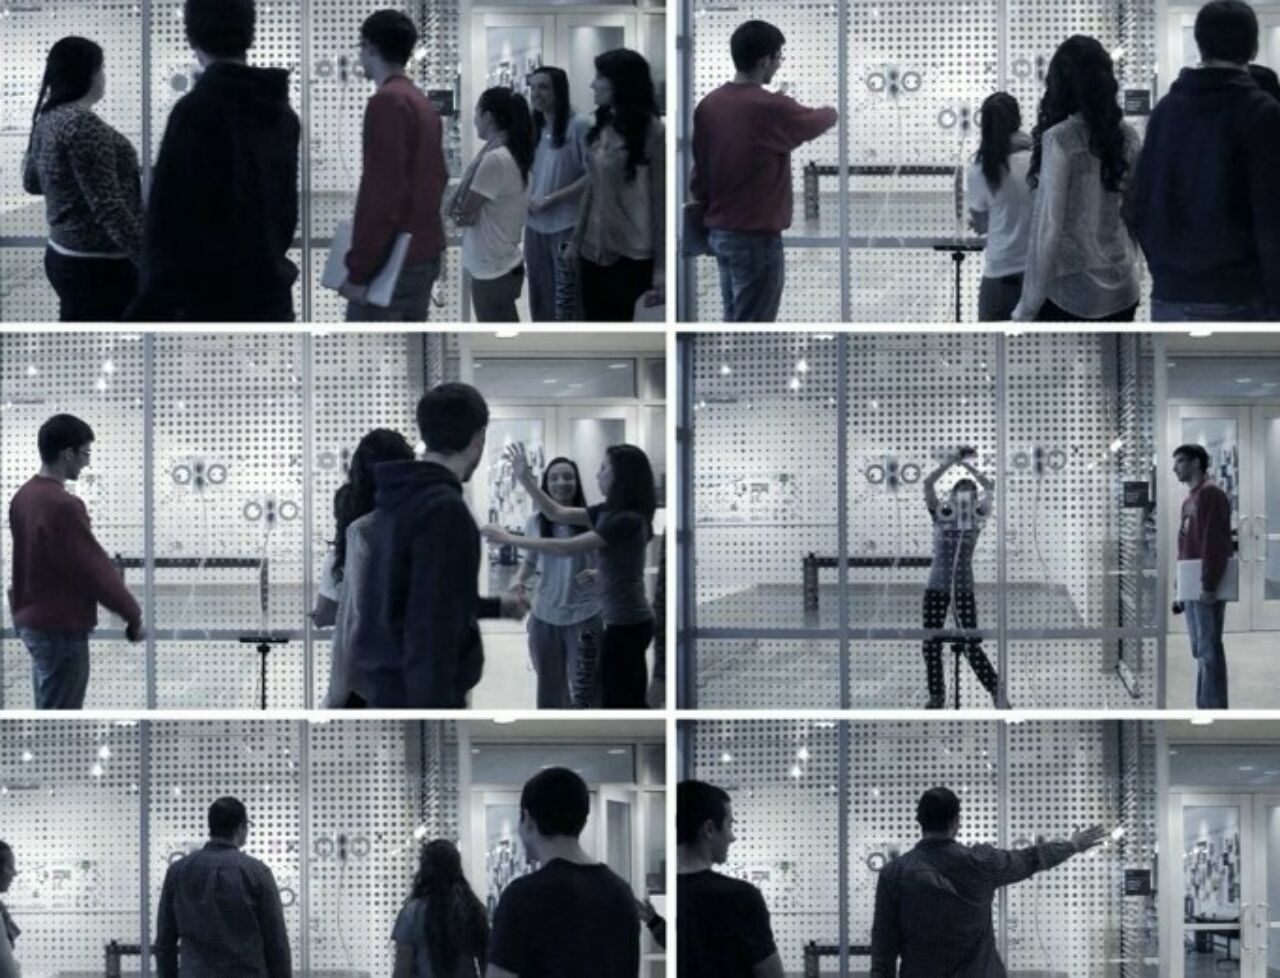 Grid of six images showing groups of students engaging with "Iris Machine" interactive installation mounted on glass wall